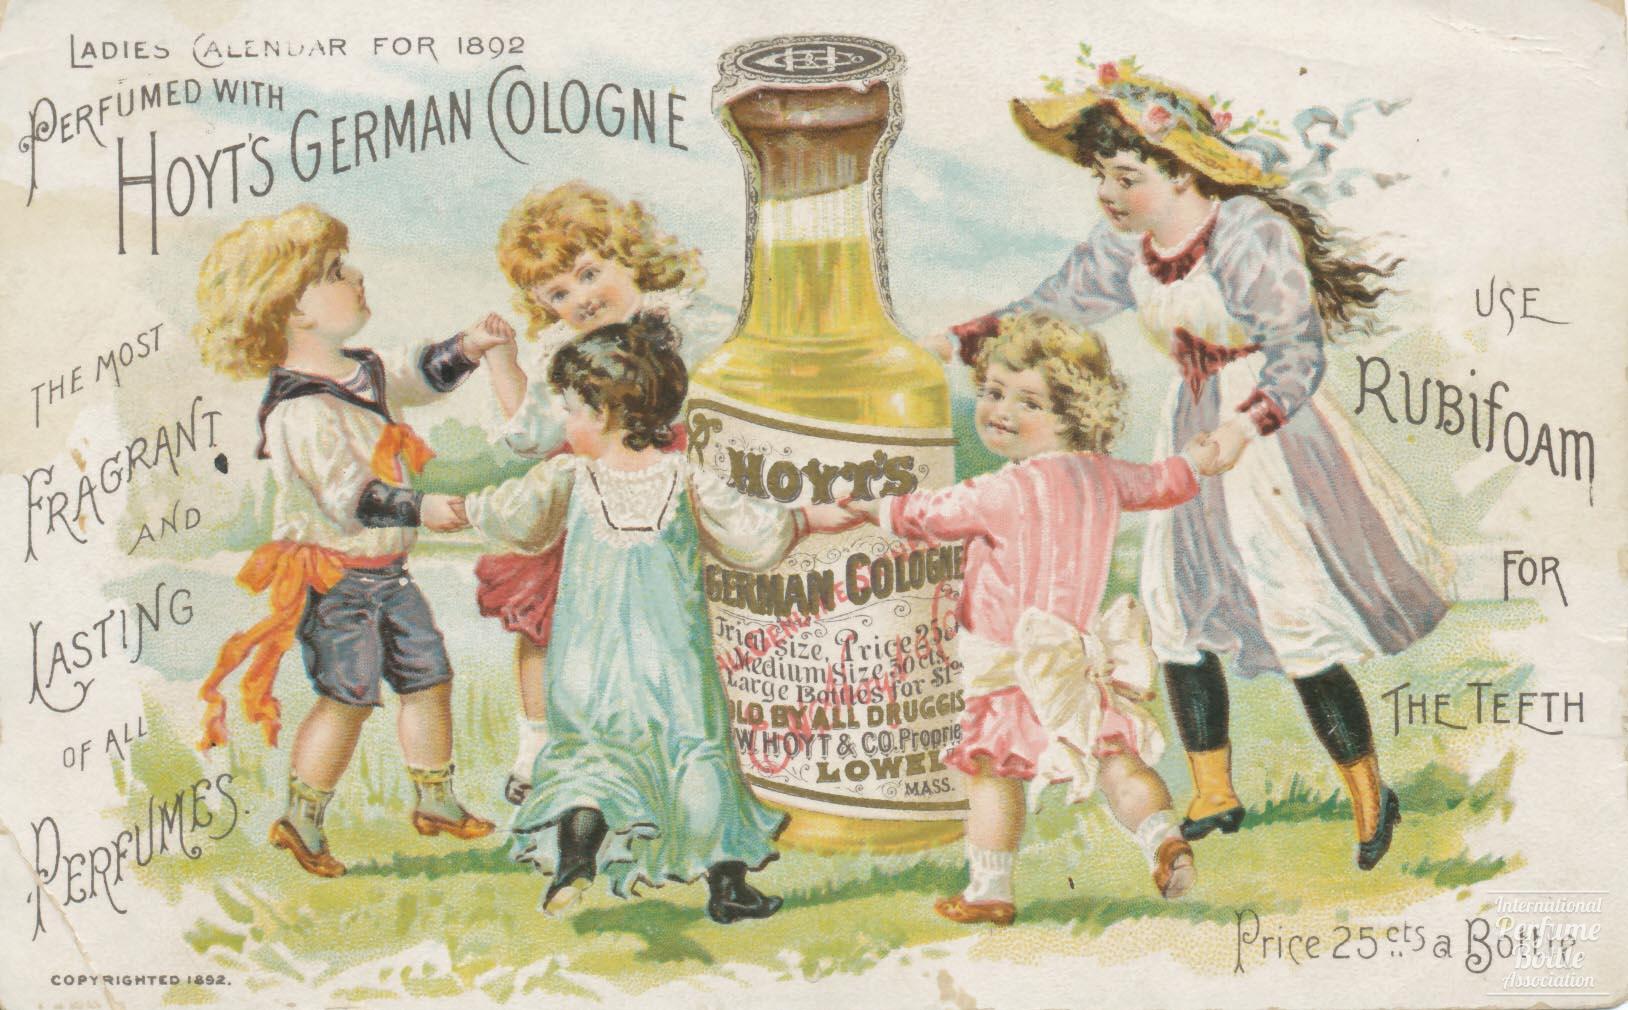 "Hoyt's German Cologne" Scent Card by E. W. Hoyt & Co. With 1892 Calendar